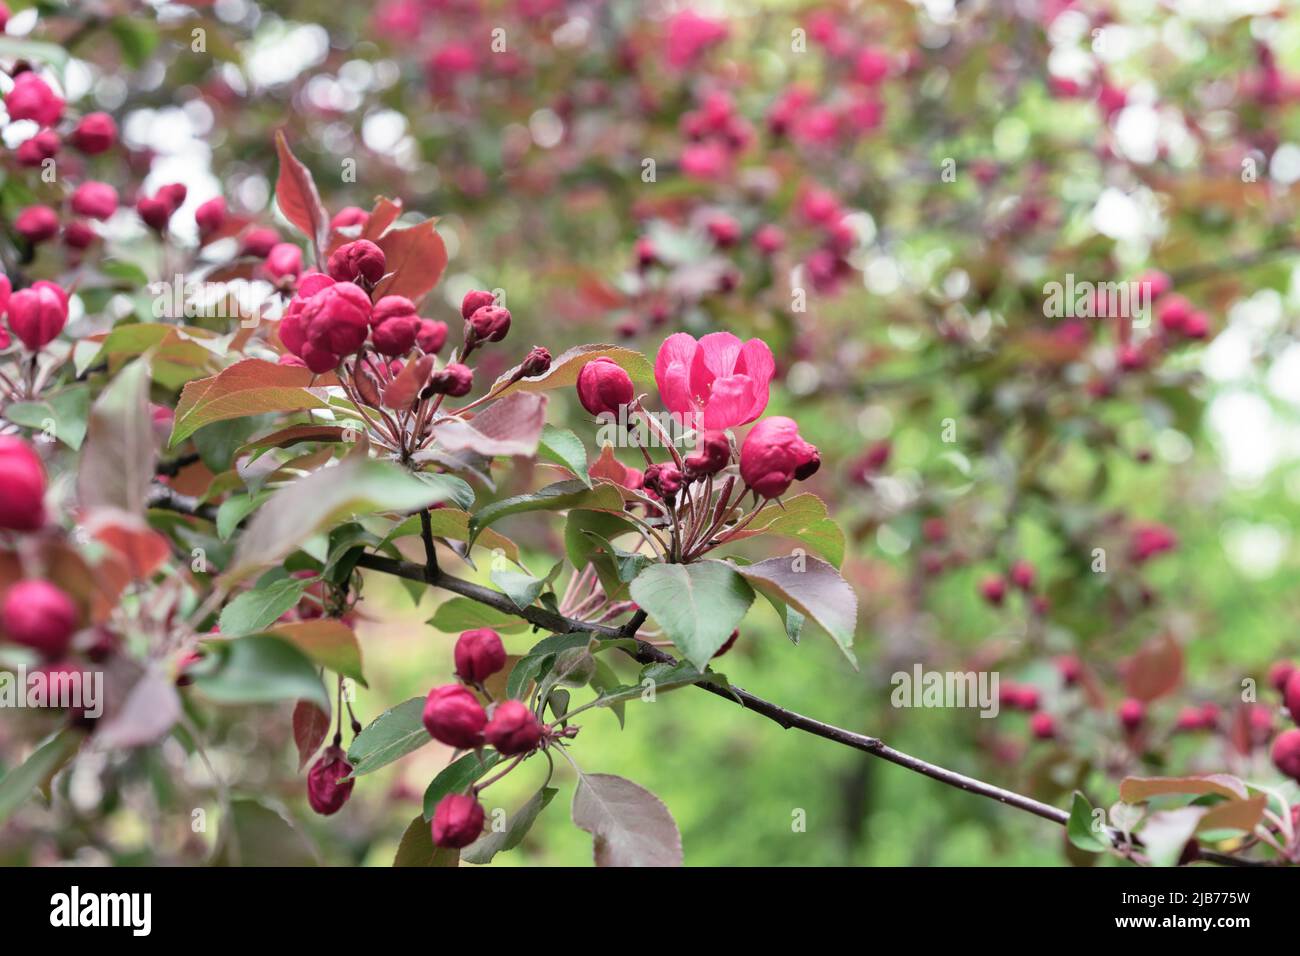 Apple tree with pink flowers in a spring garden. Pink-red inflorescences of an ornamental apple tree. Stock Photo